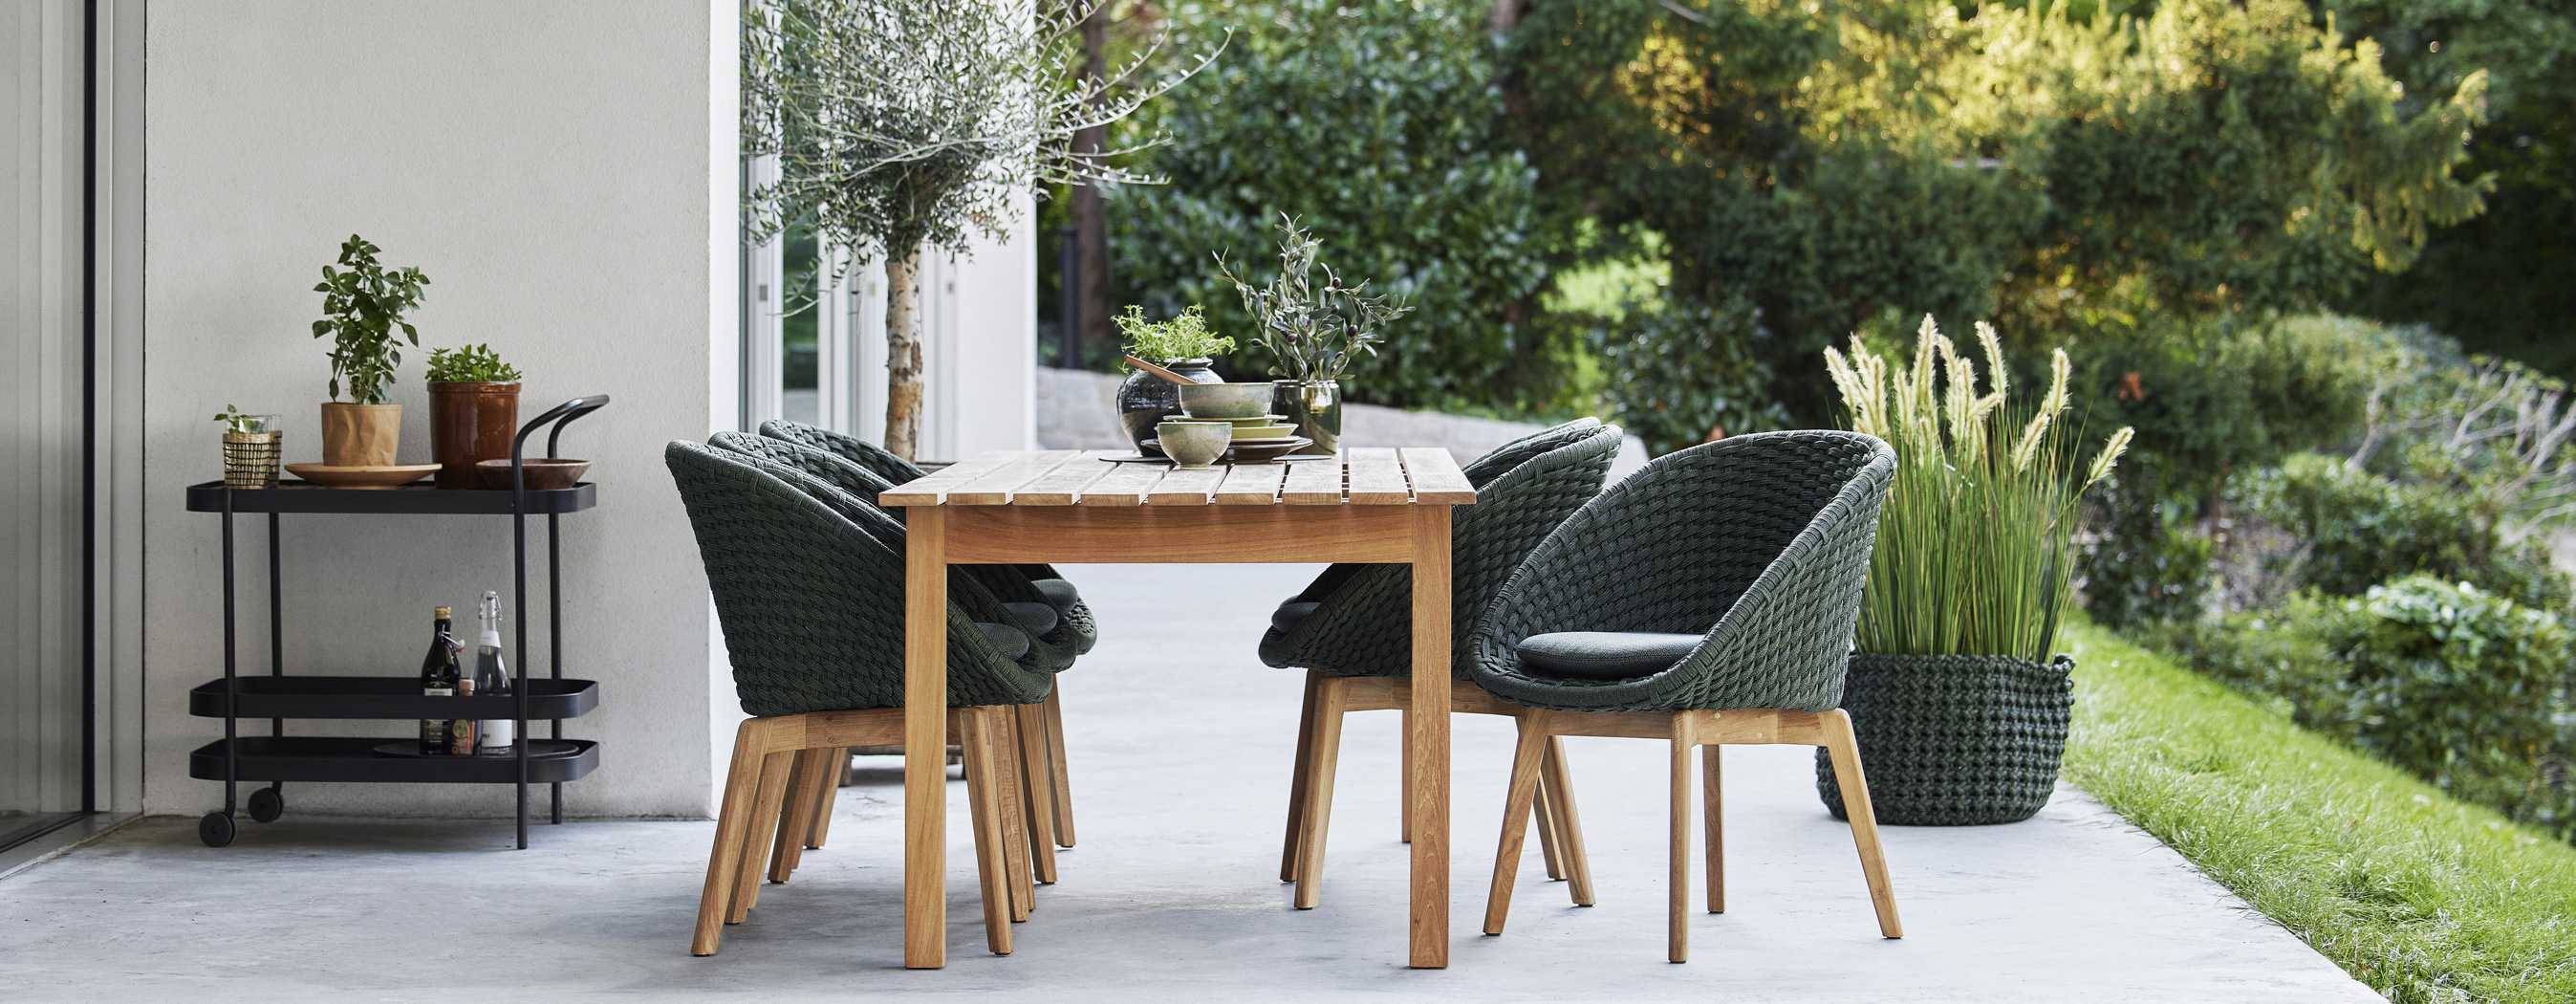 Cane-line Grace Table and Peacock Outdoor Chairs